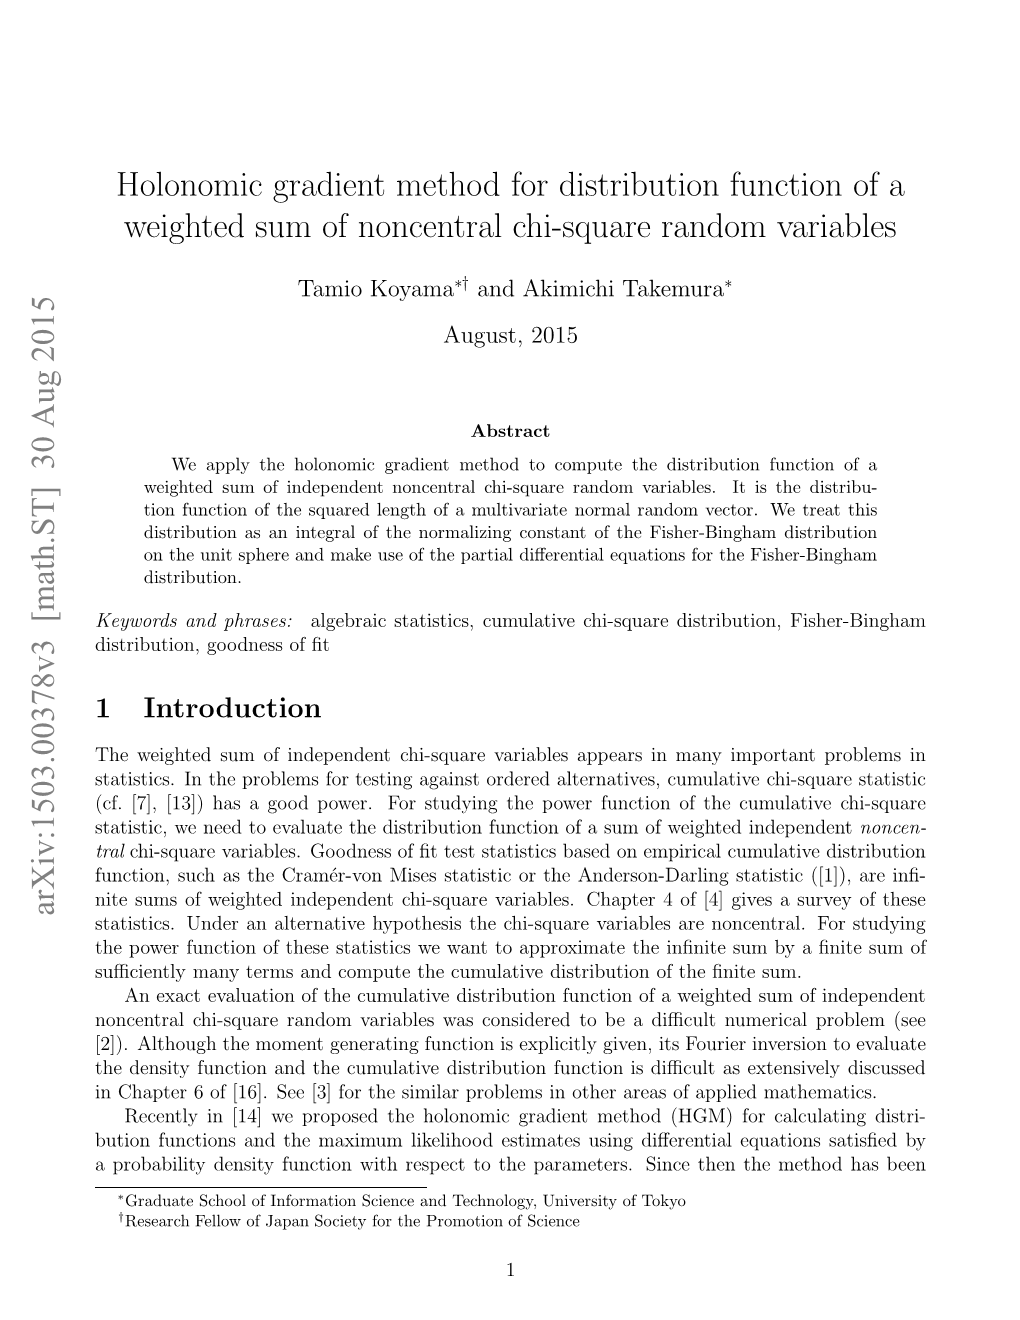 Holonomic Gradient Method for Distribution Function of a Weighted